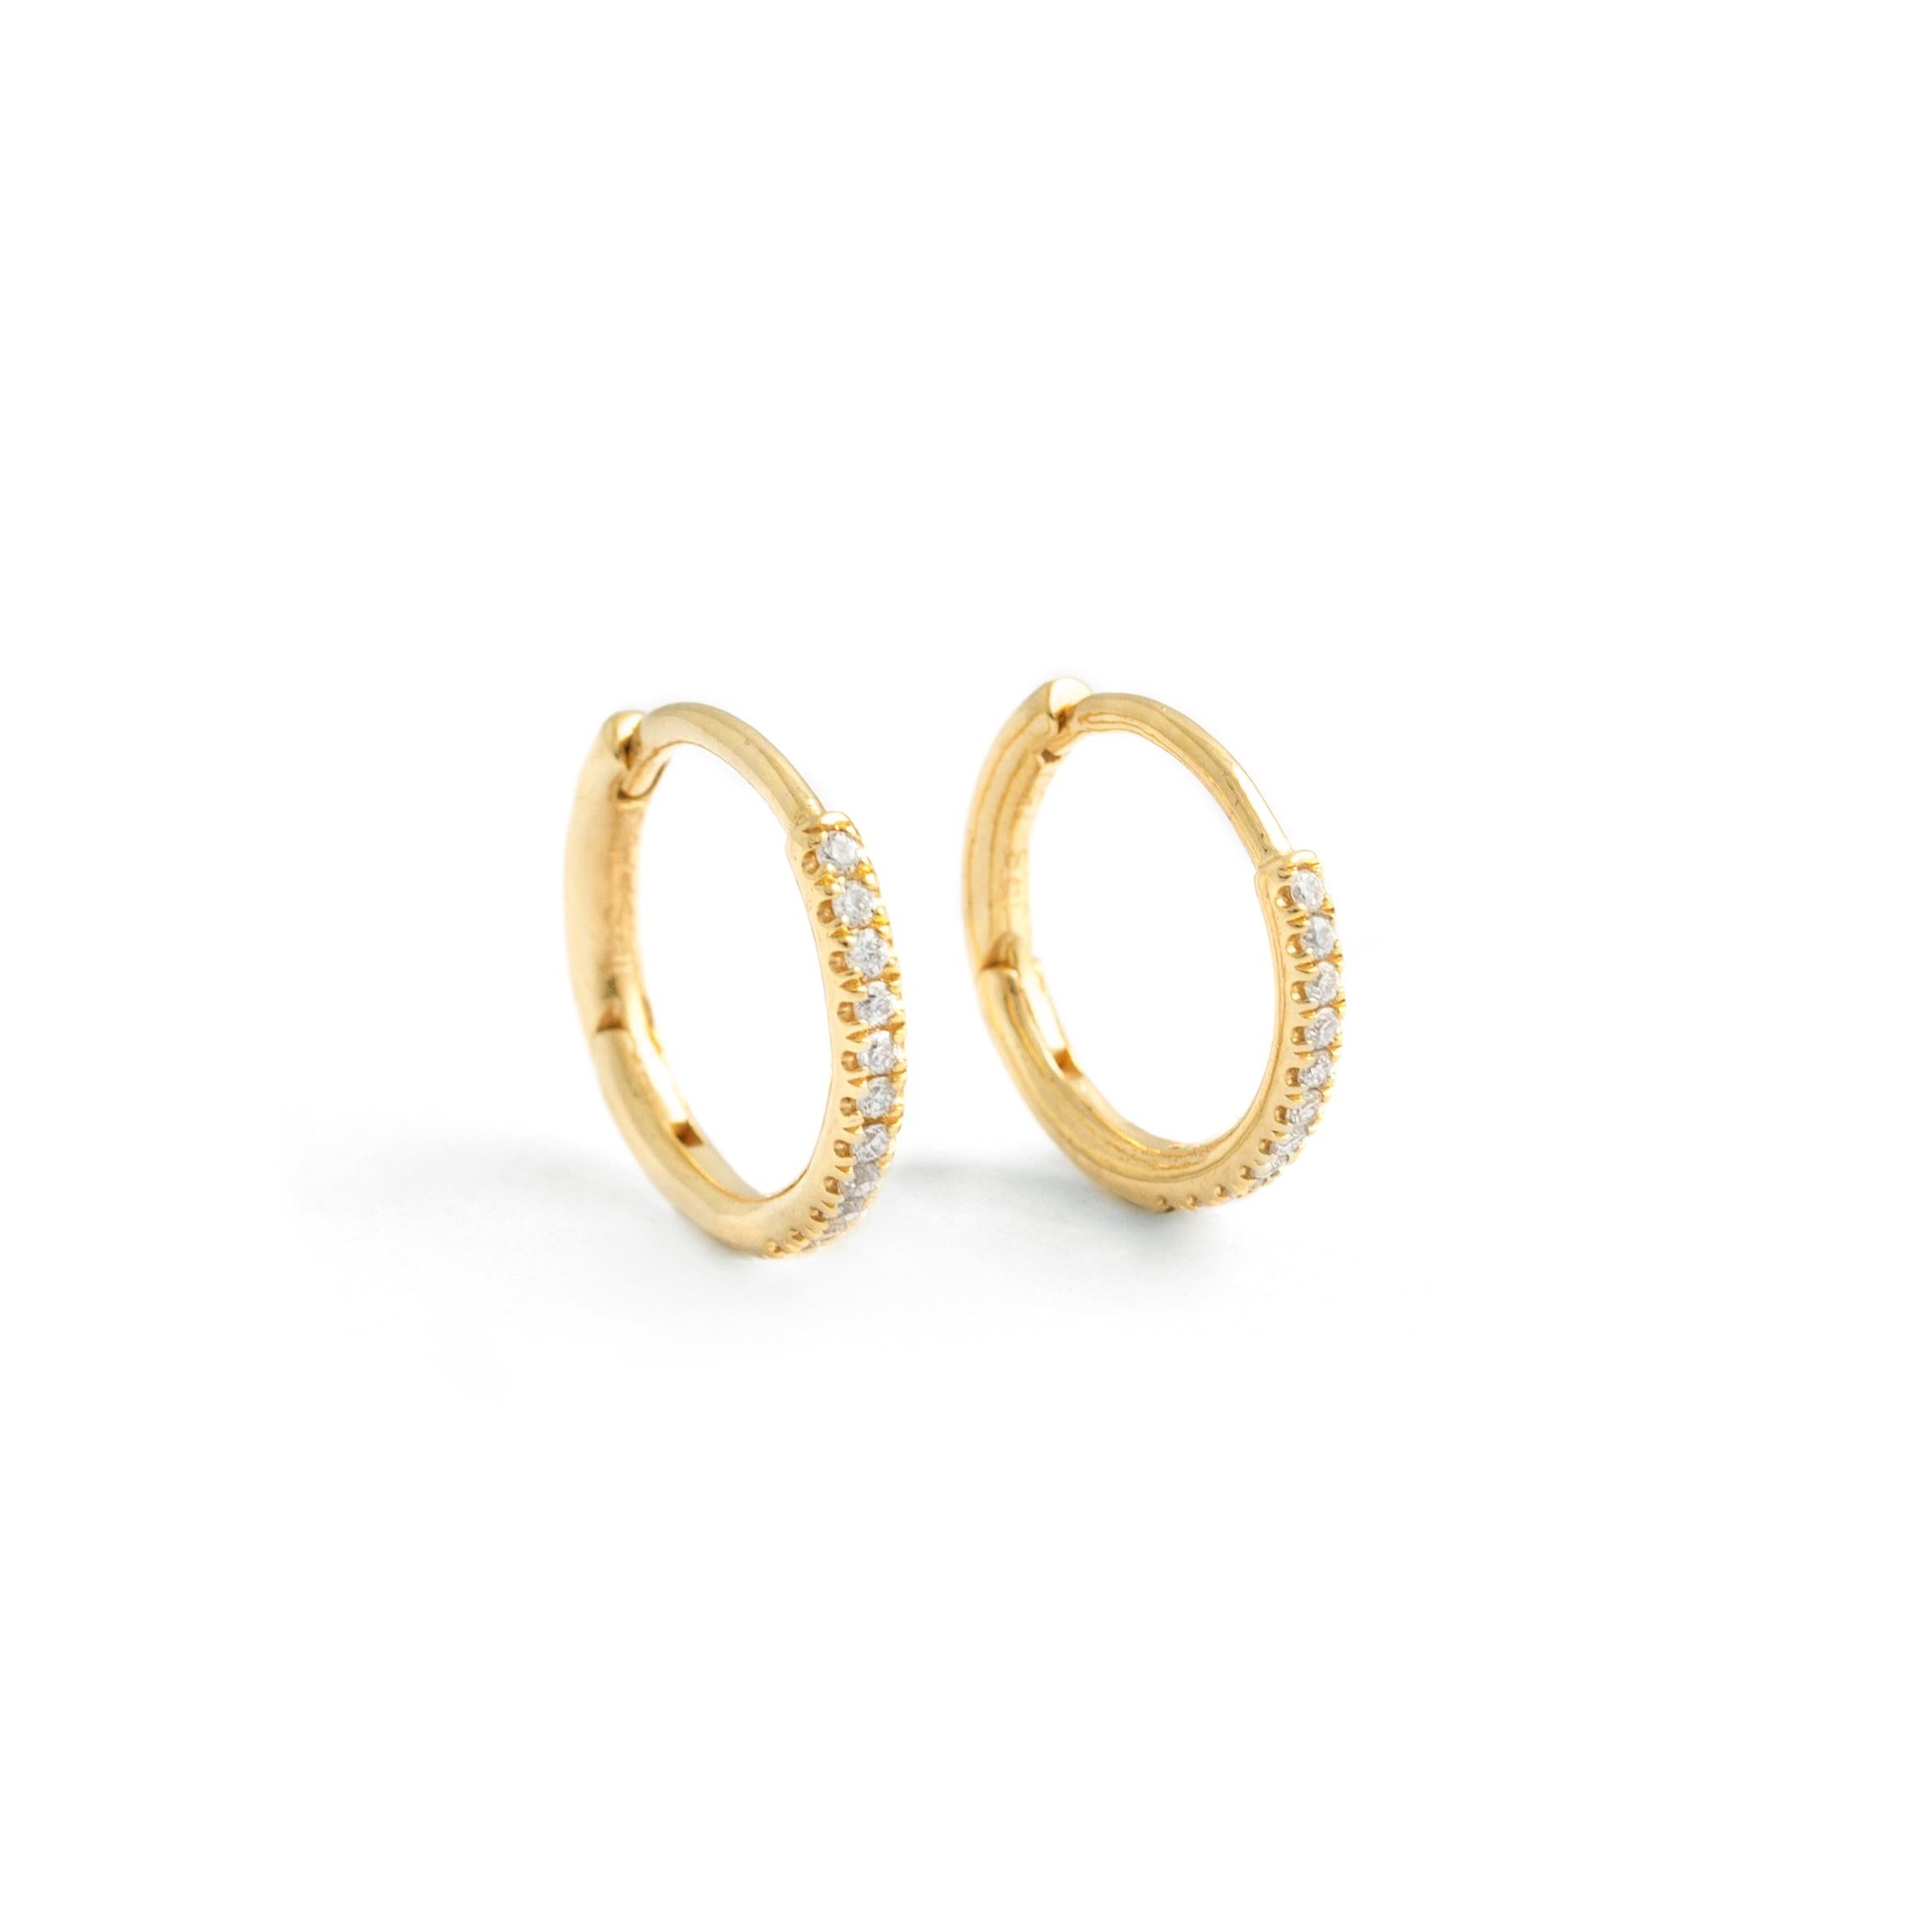 Earrings in yellow gold 18K round cut diamonds 0.08 carat, estimated G color and Si1 clarity. 
Total gross weight: 1.03 grams.
